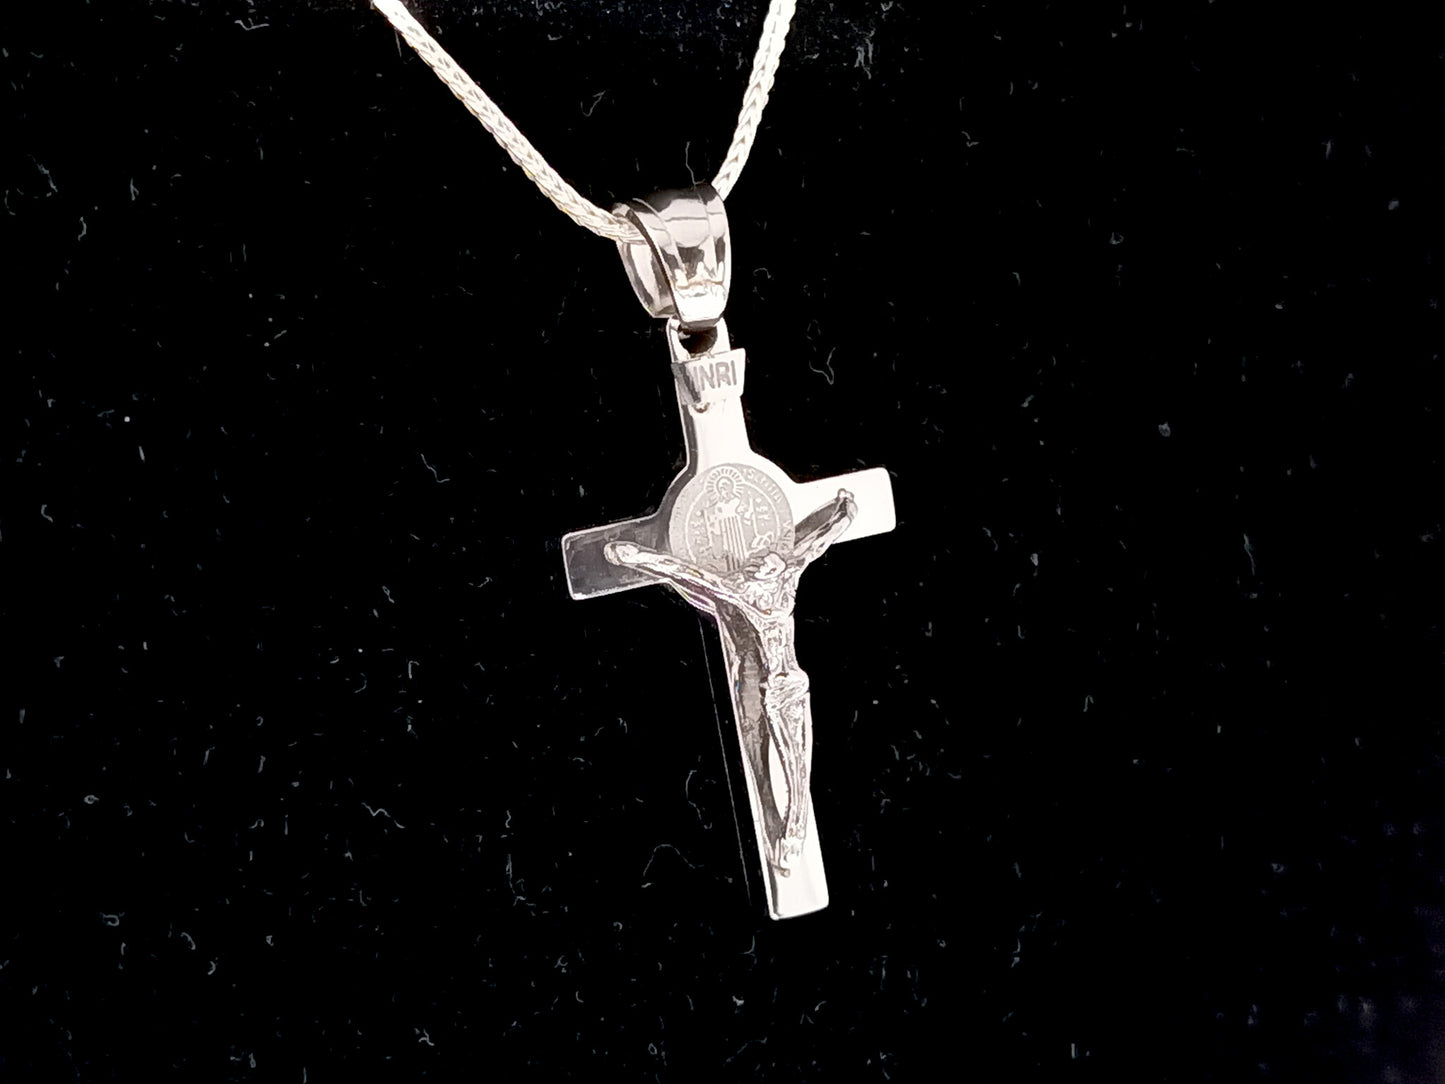 Saint Benedict unique rosary beads stainless steel crucifix with 925 sterling silver belcher chain.